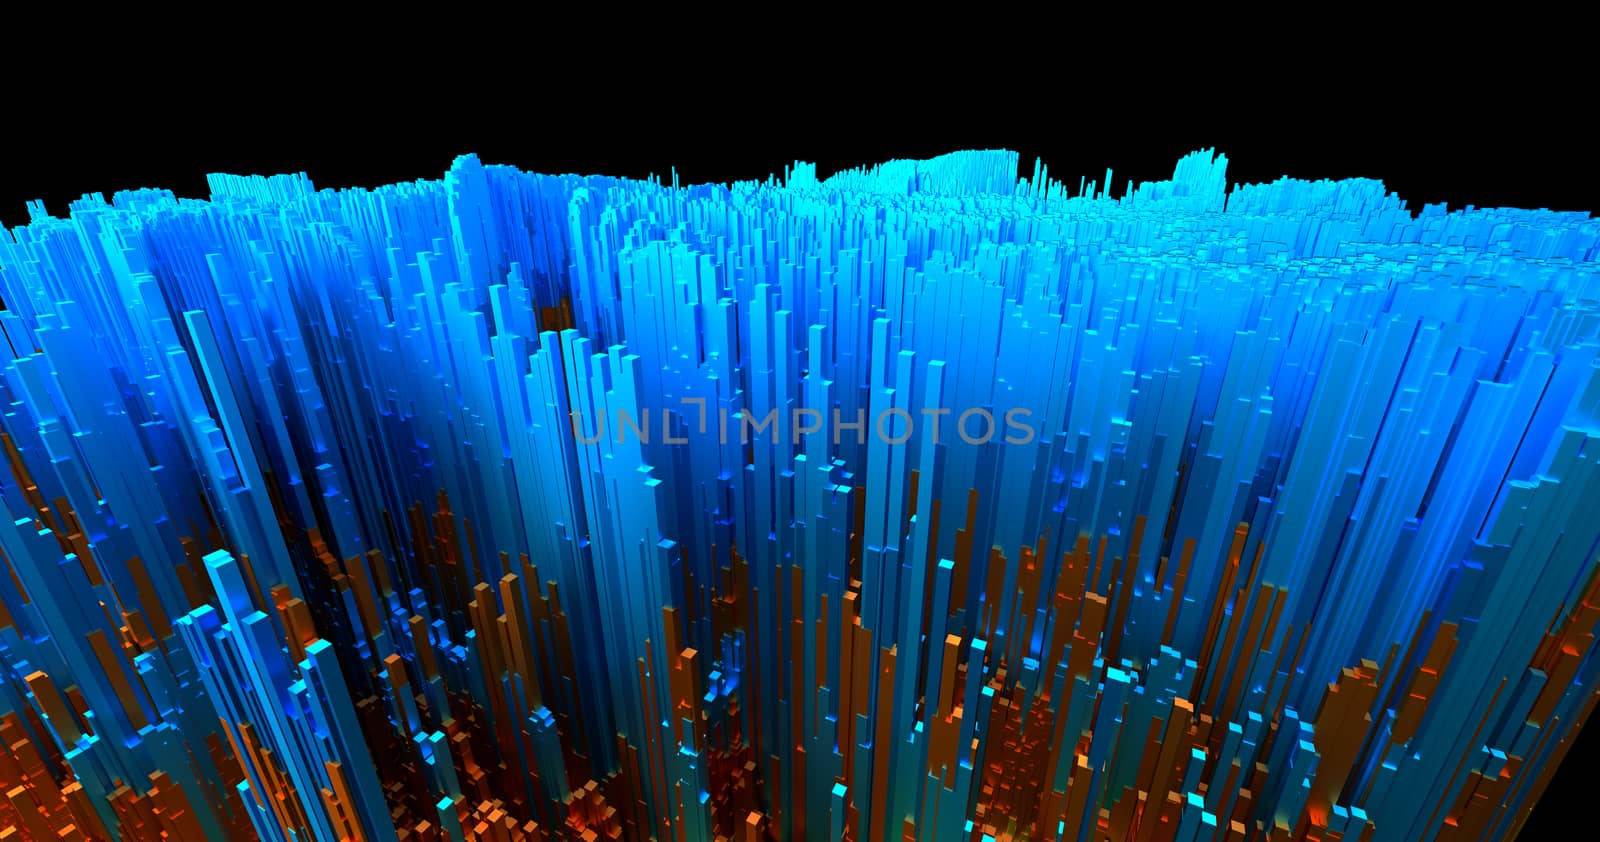 Abstract big data background wallpaper design. Motion pattern texture with shine colorful lines and cubes. Modern light shiny backdrop. 3D render